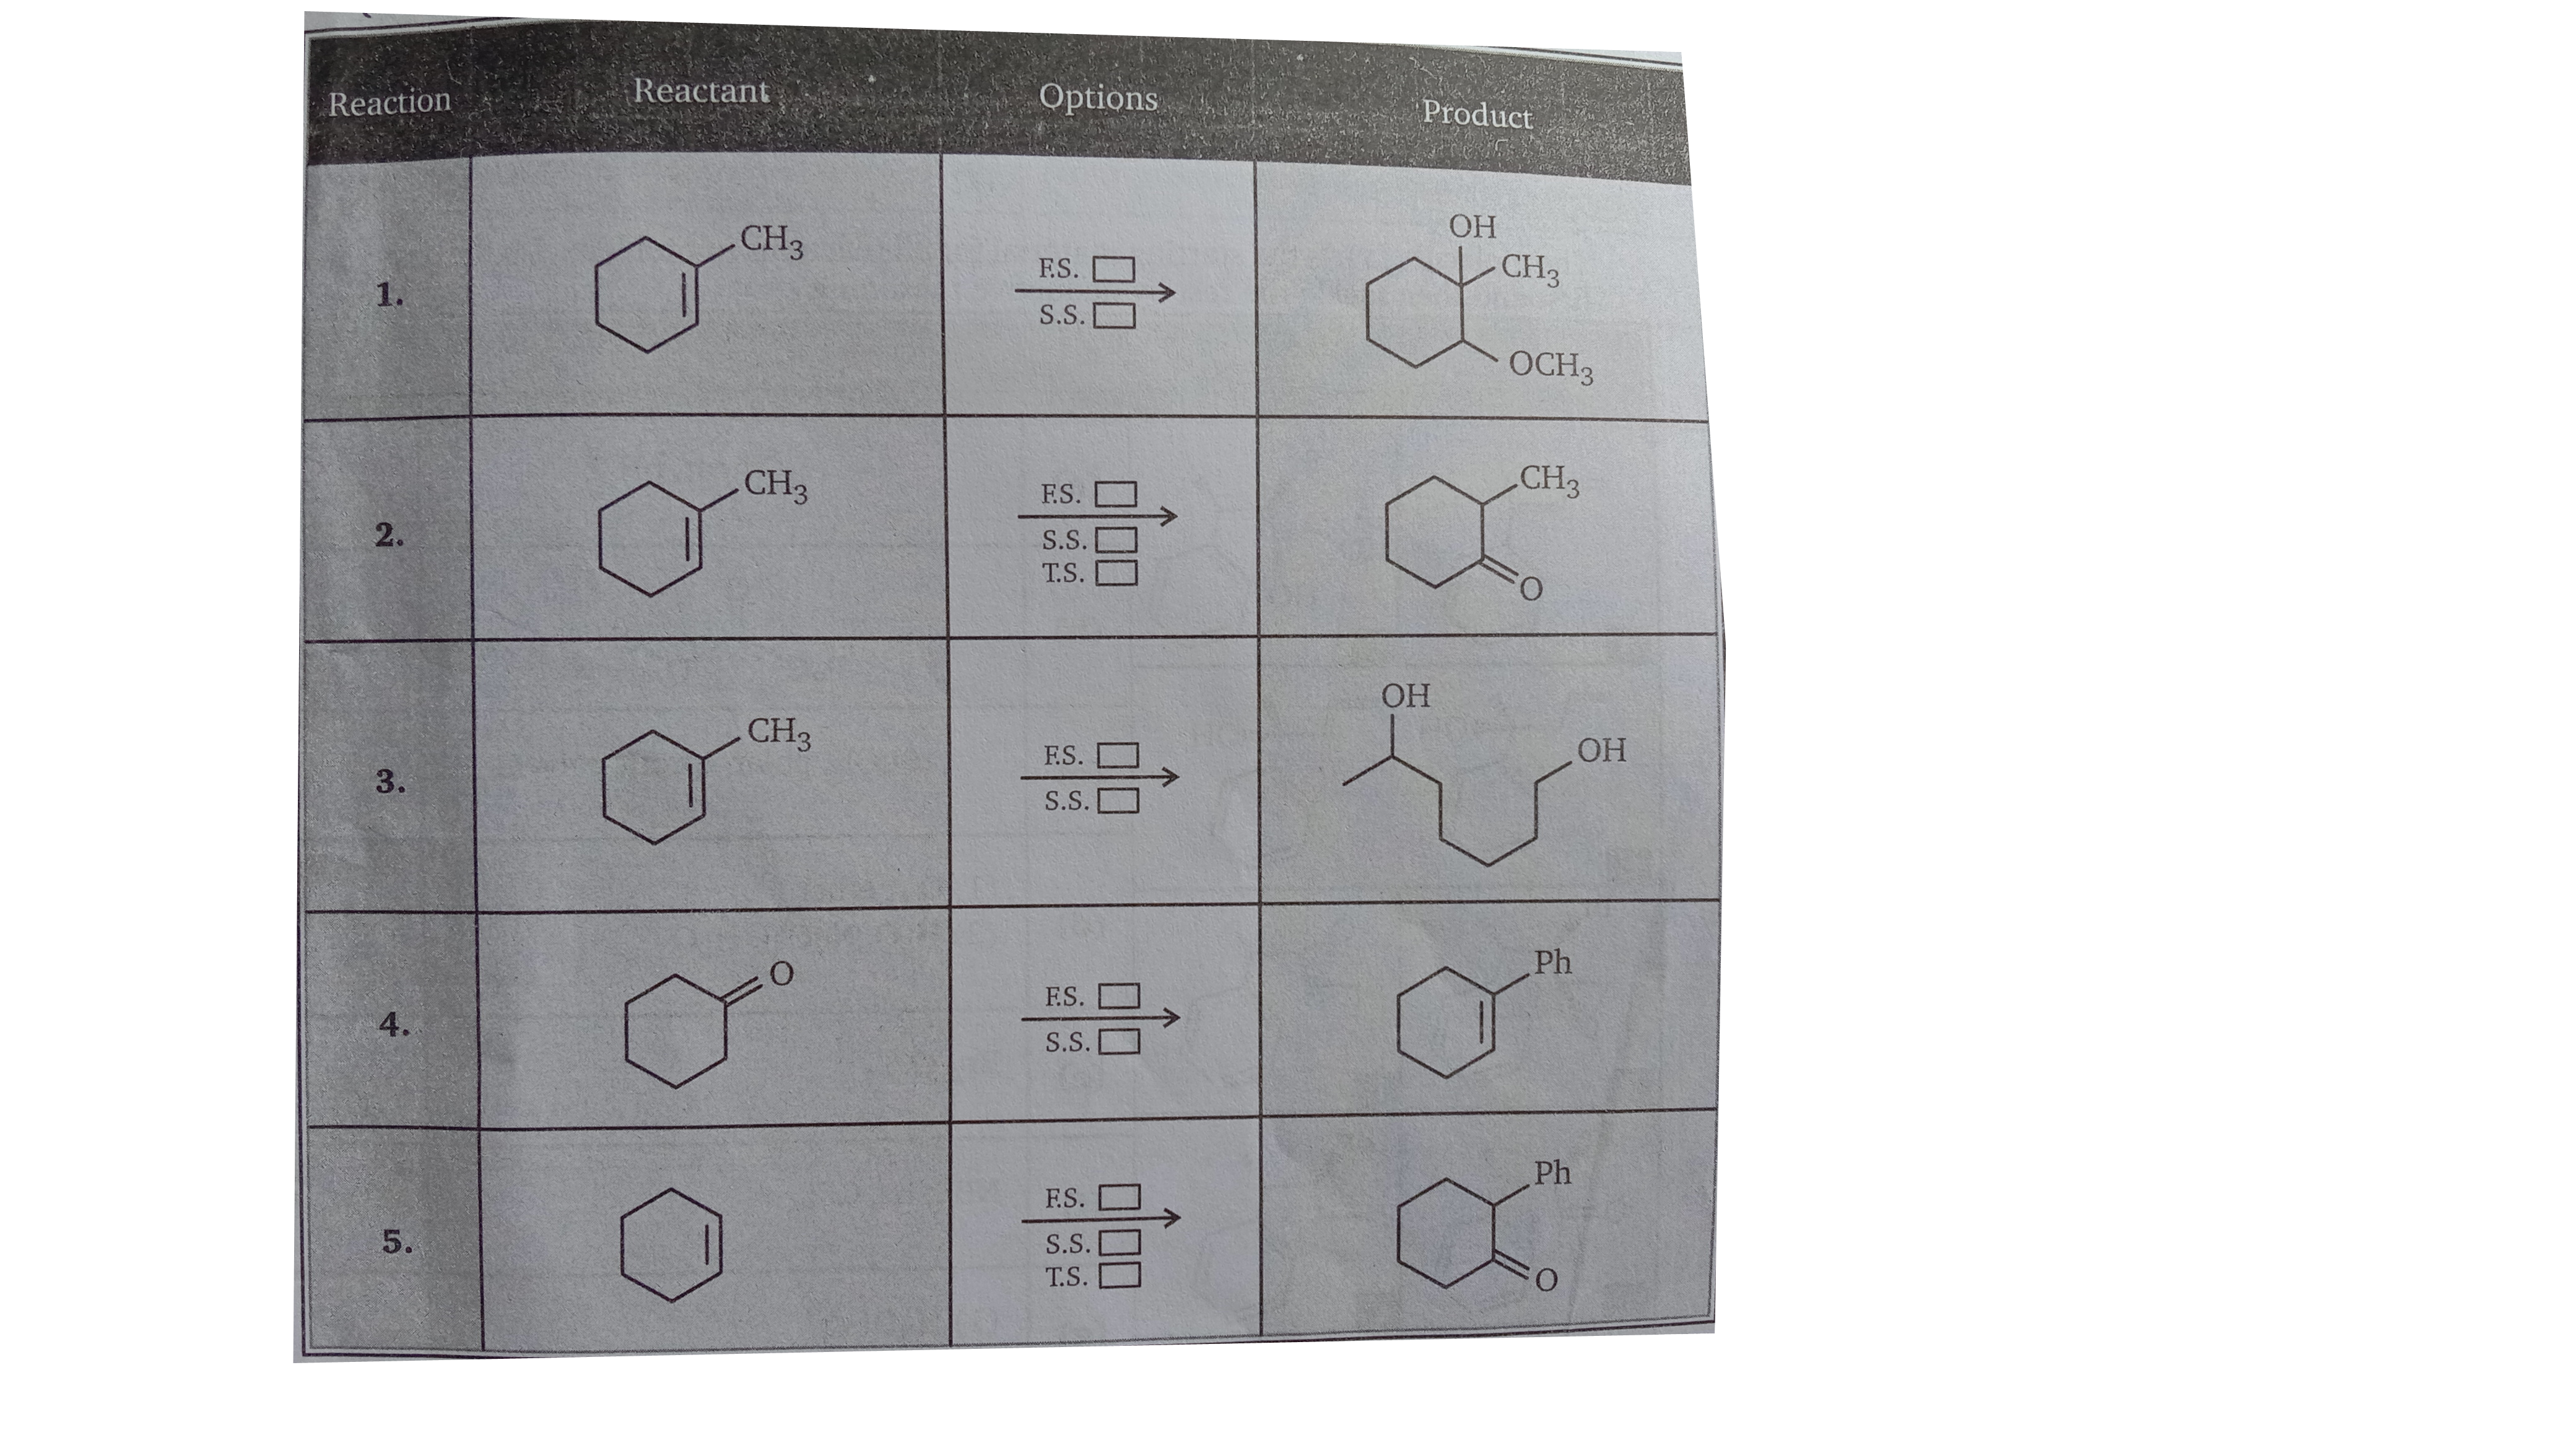 In each reaction box write a single letter designating the best reagent and condition selected from the list at bottom of the page.